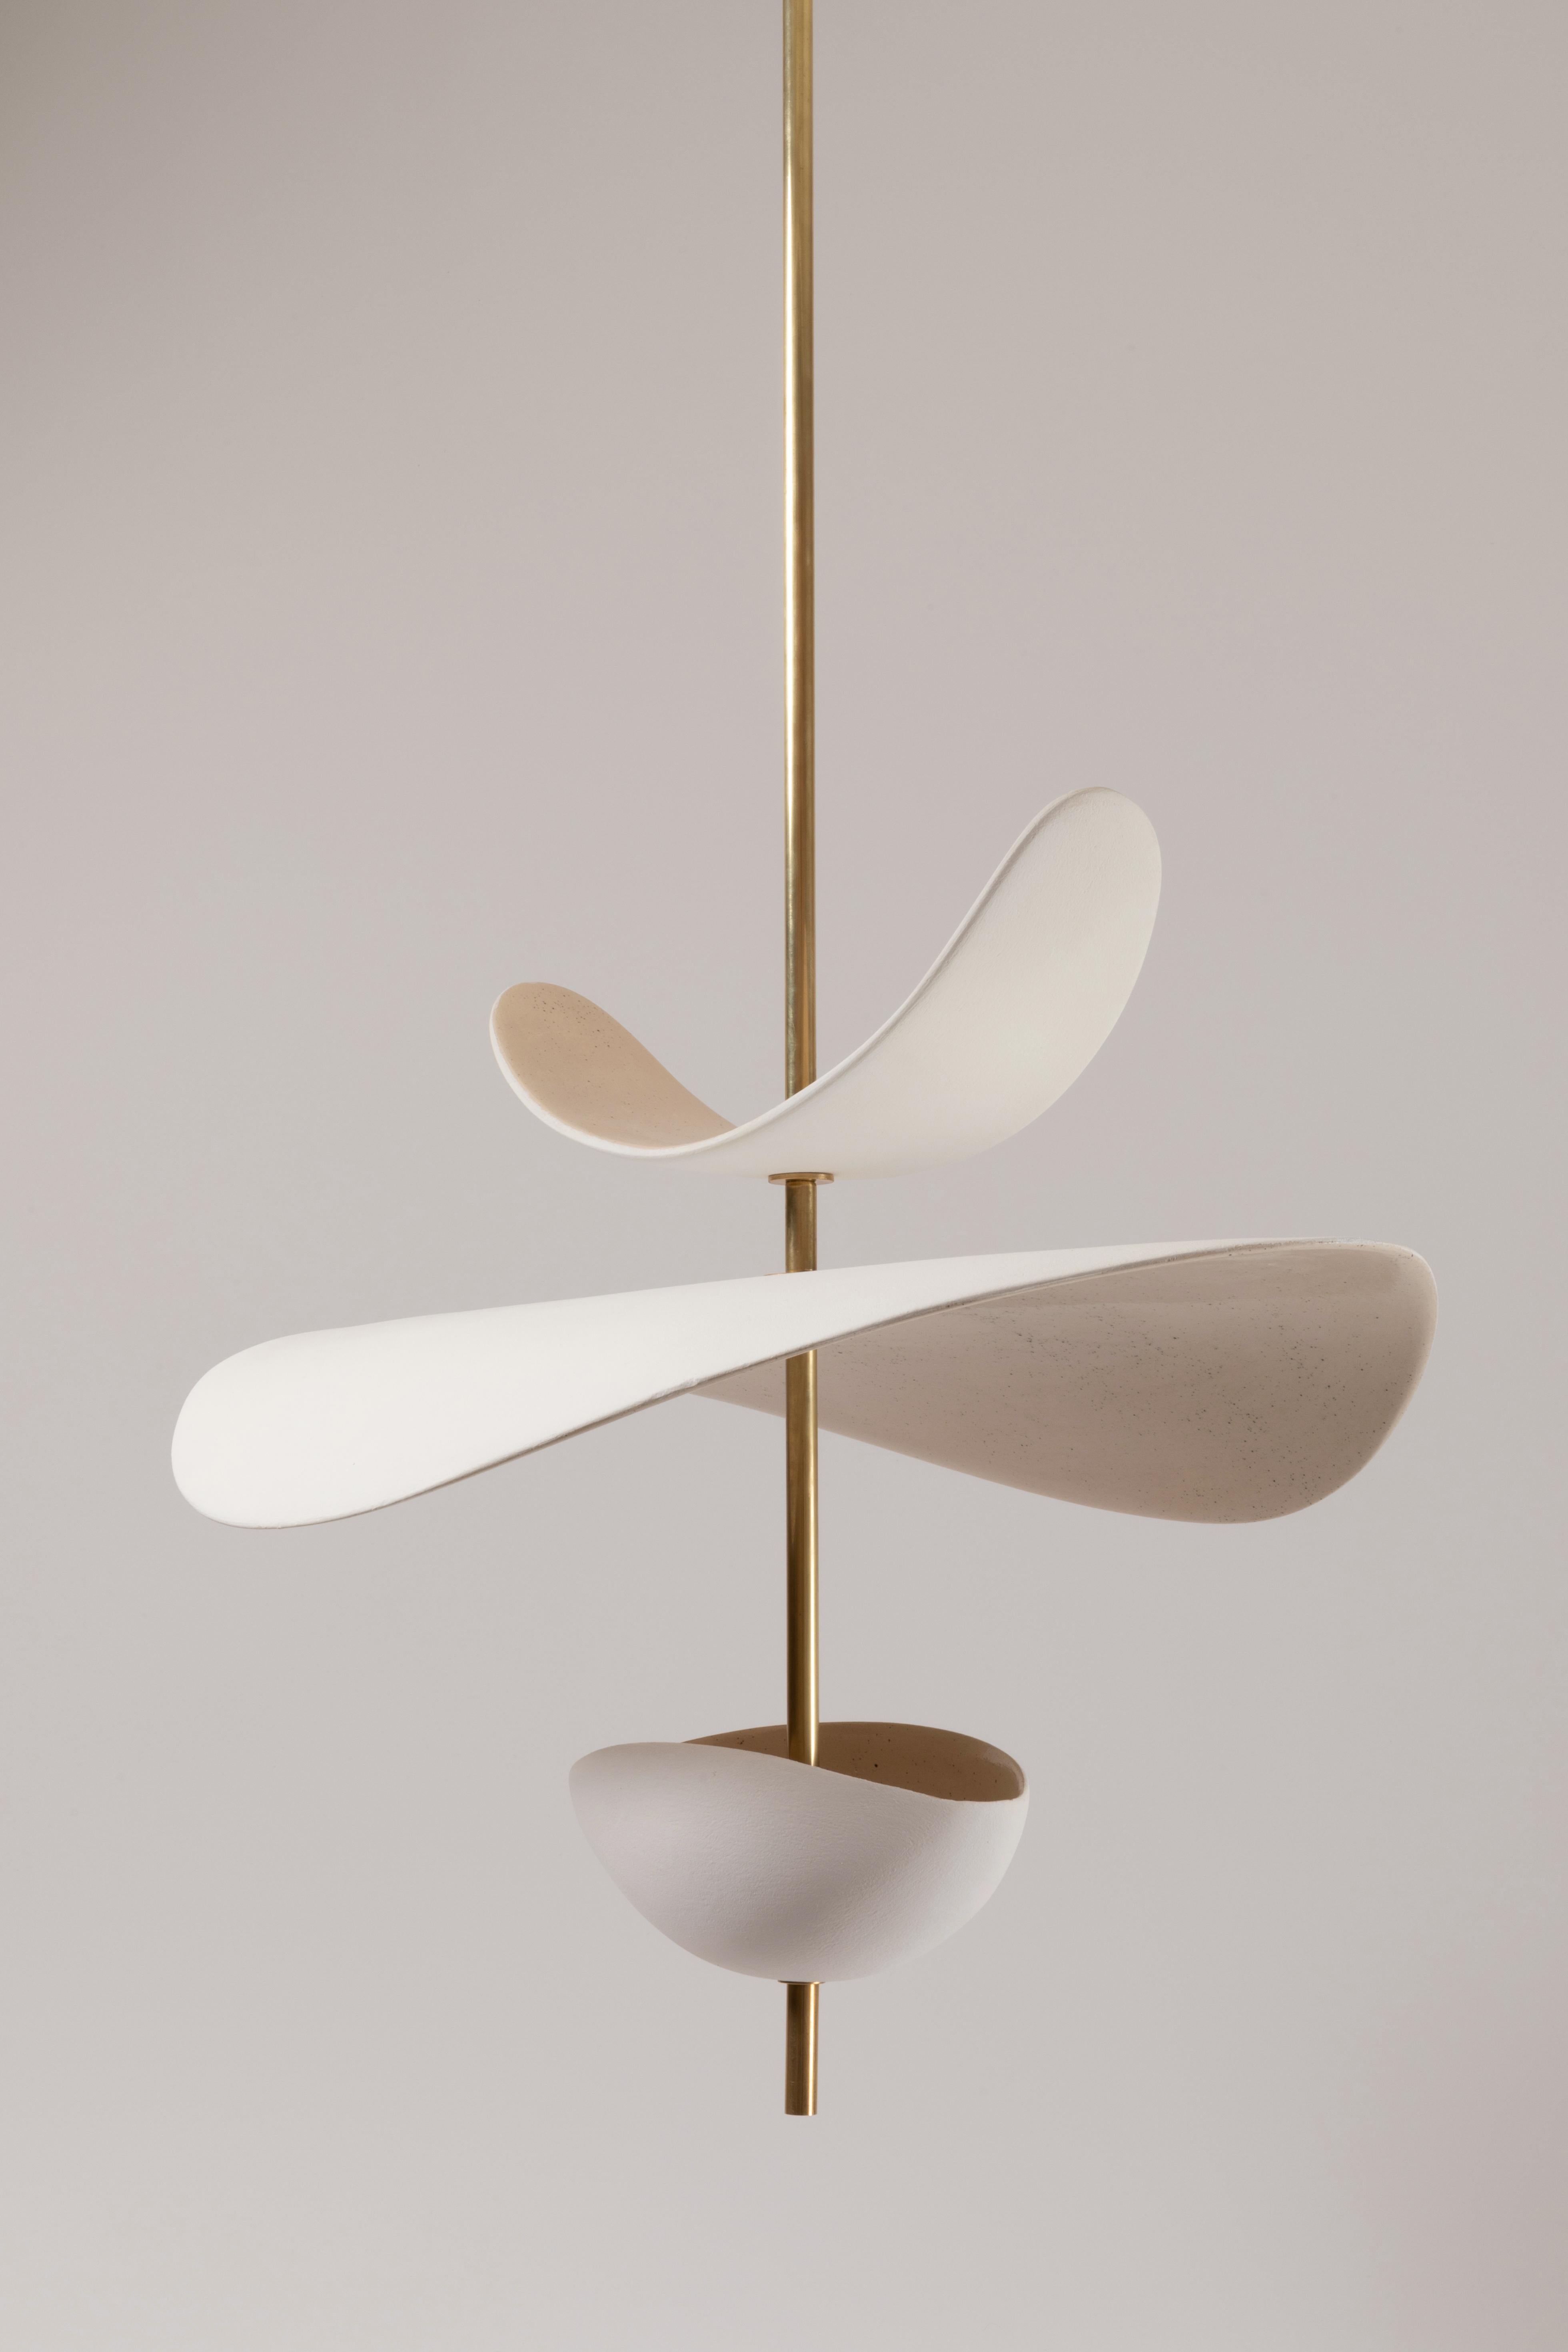 Antigone XL Pendant Lamp by Elsa Foulon
Dimensions: D 75 x H 65 cm 
Materials: Ceramic, Brass
Unique Piece
Also available in different options: Bowl or Cup (lower part).
Minimum height: 65 cm 
Maximum height: 79 cm

All our lamps can be wired